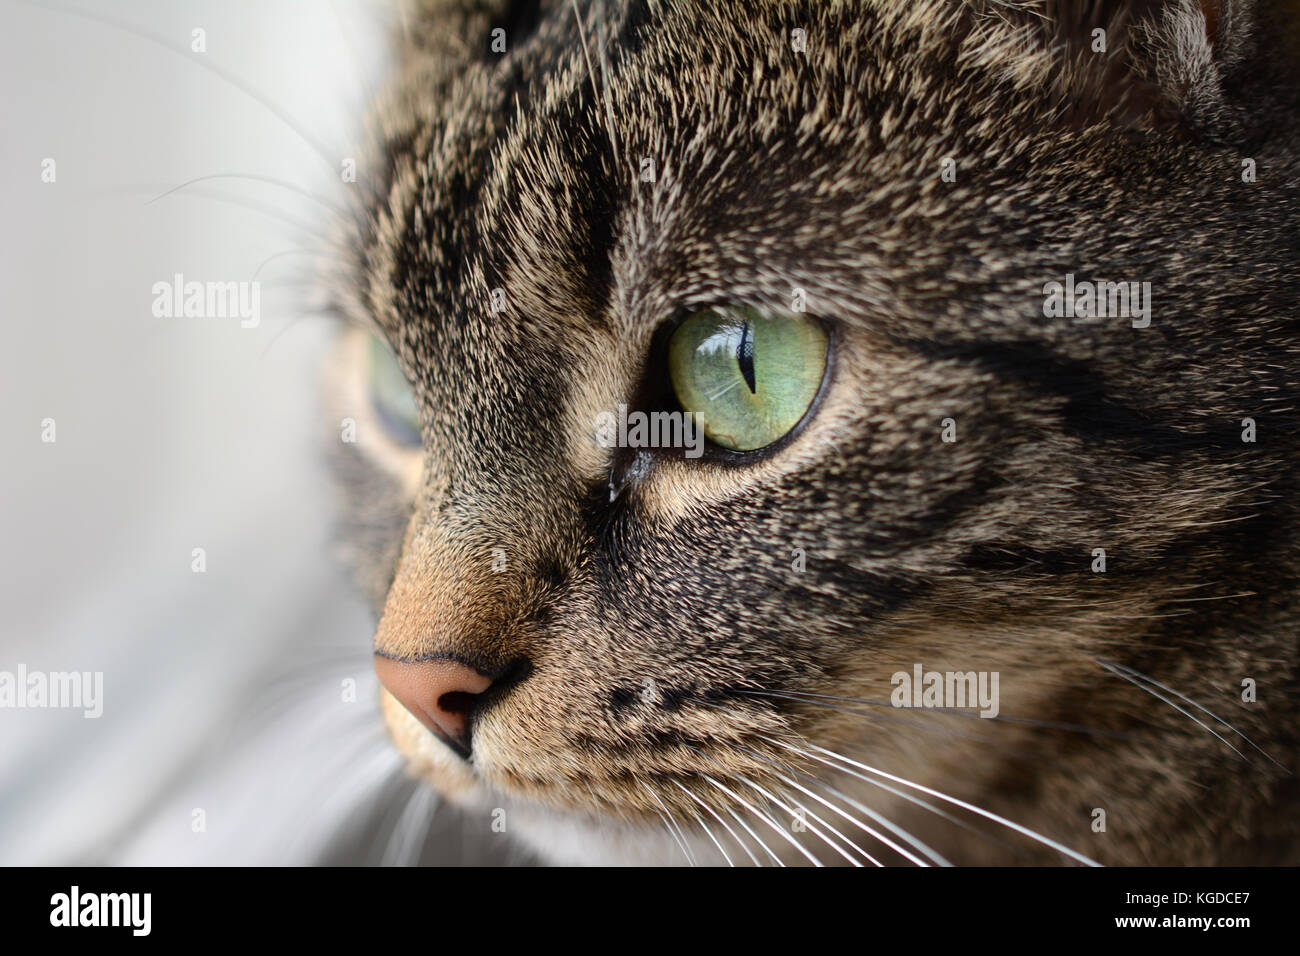 Close-up of cat's face with big, green eyes Stock Photo